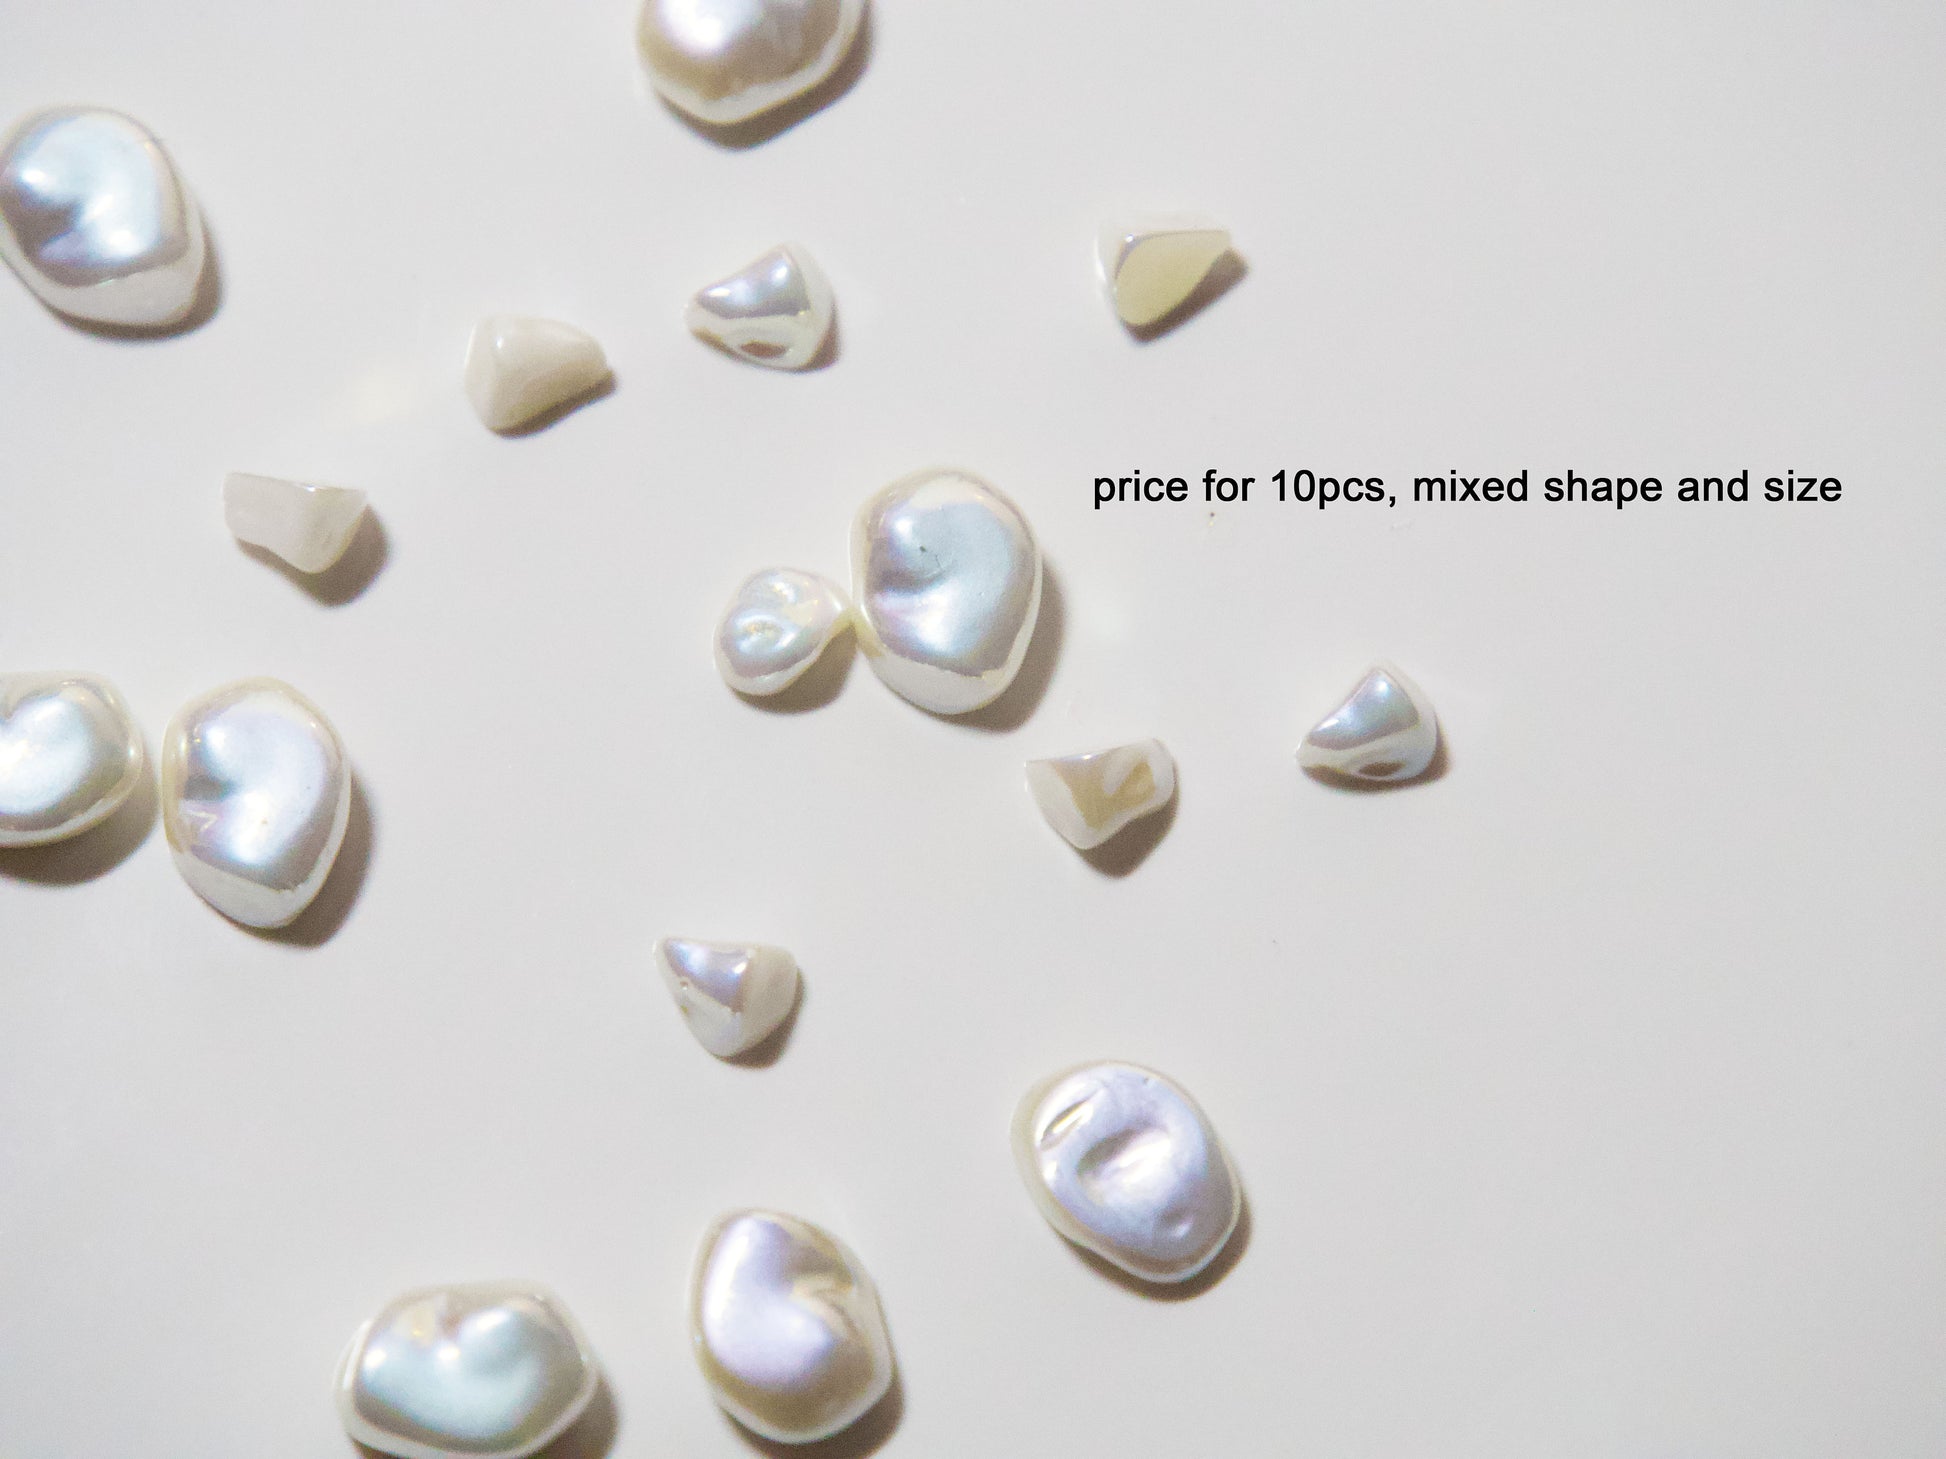 10pcs Iridescent Baroque Artificial Pearls Irregular Asymmetric shape Pearl for Vintage Nails Decoration Manicure Supply